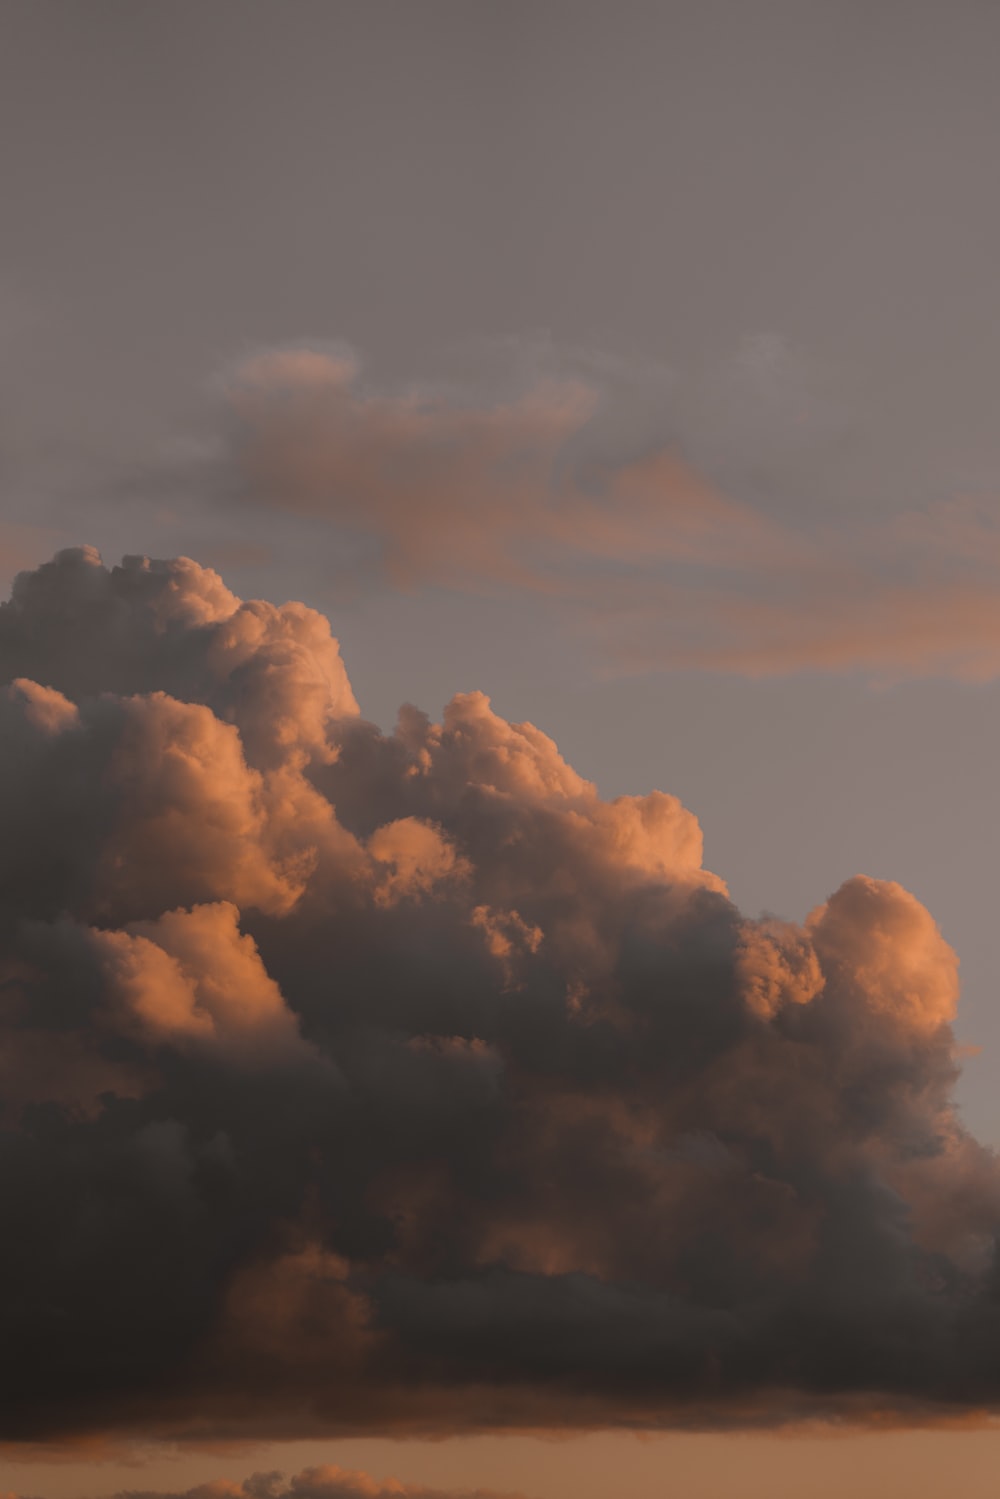 Cloud Aesthetic Picture. Download Free Image